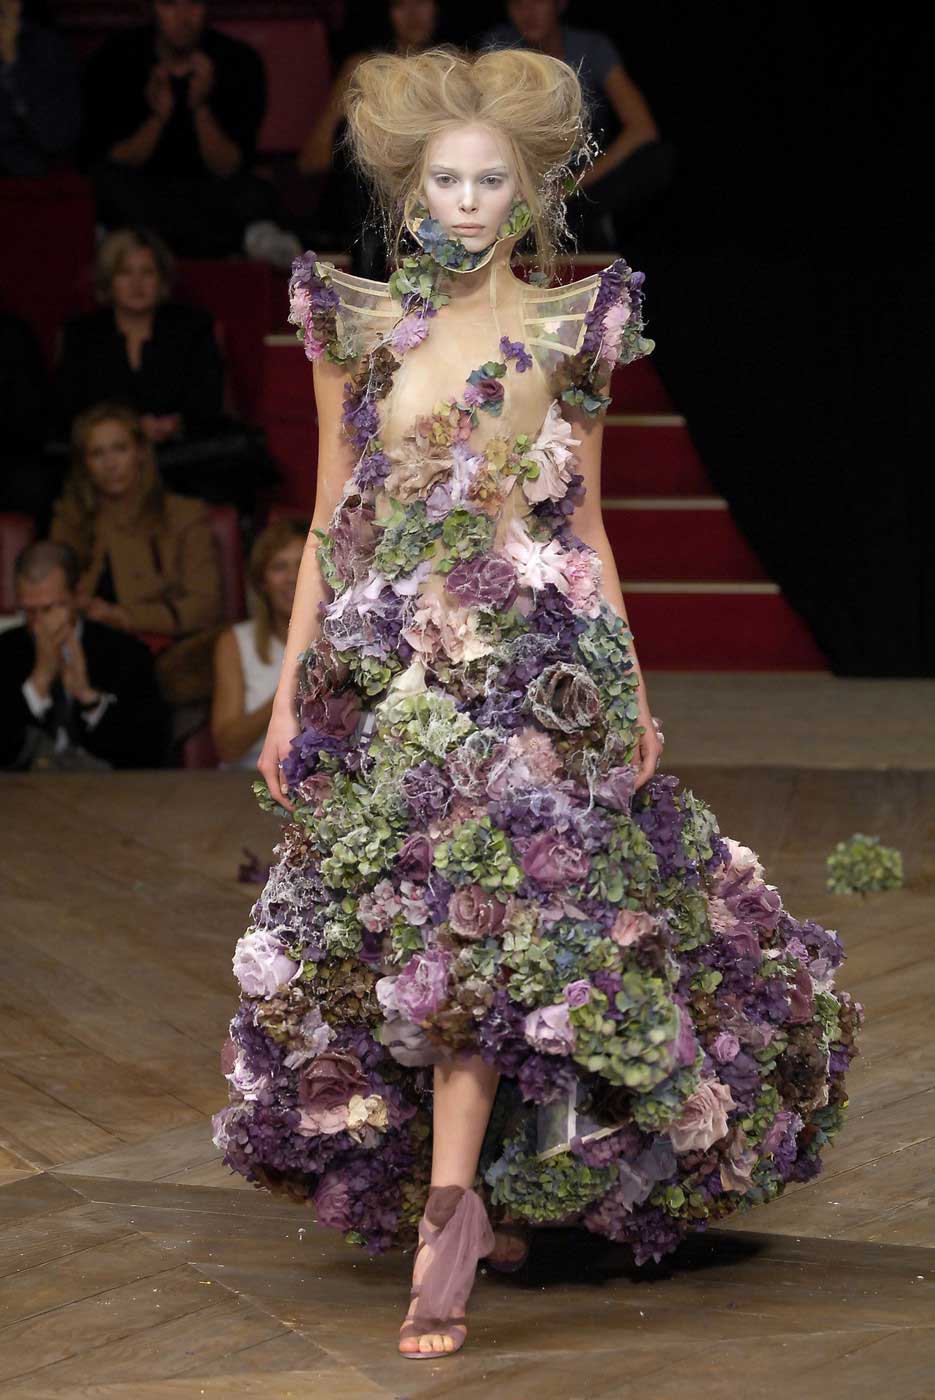 Tania Dzyagileva wearing Alexander McQueen dress made of frozen flowers from the "Sarabande" Spring Collection (image: fashionbylove.com).&nbsp;&nbsp;Notice the felled and lost foliage in the background! Maybe a small cutting garden?